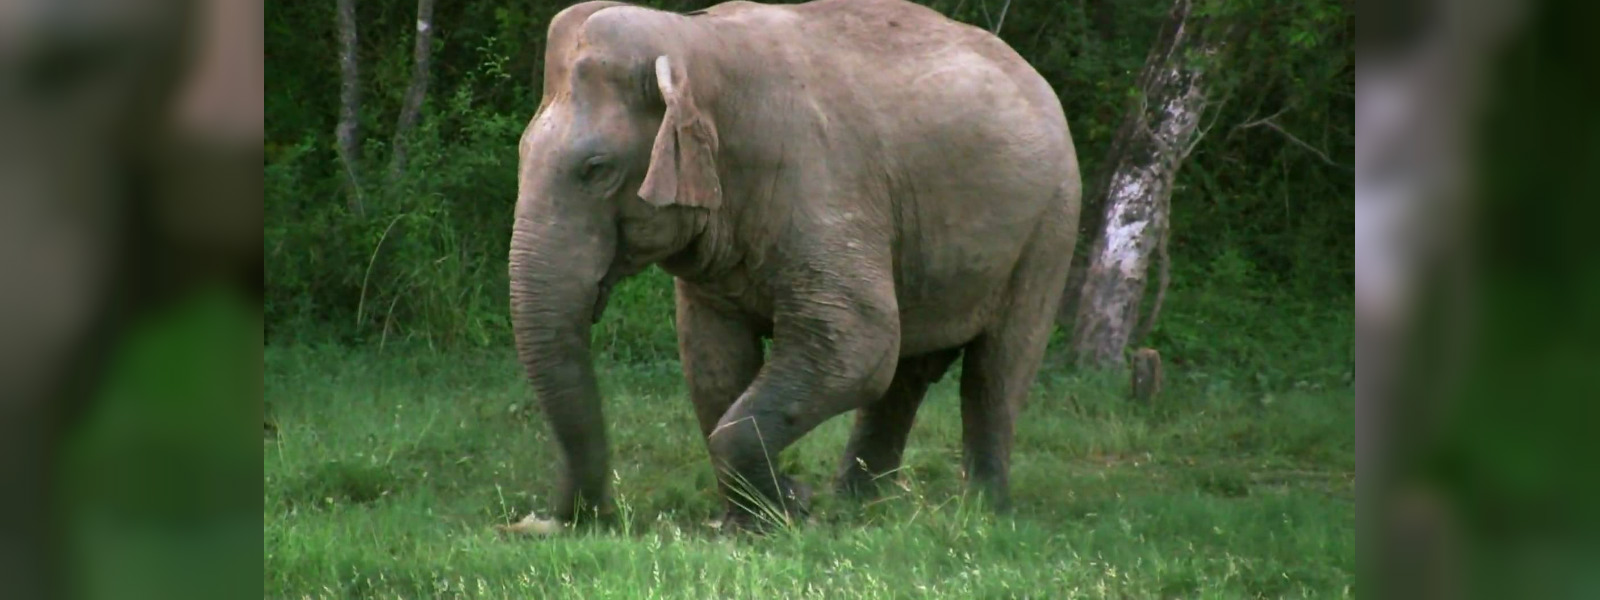 Living fences to fight wild elephant invasions